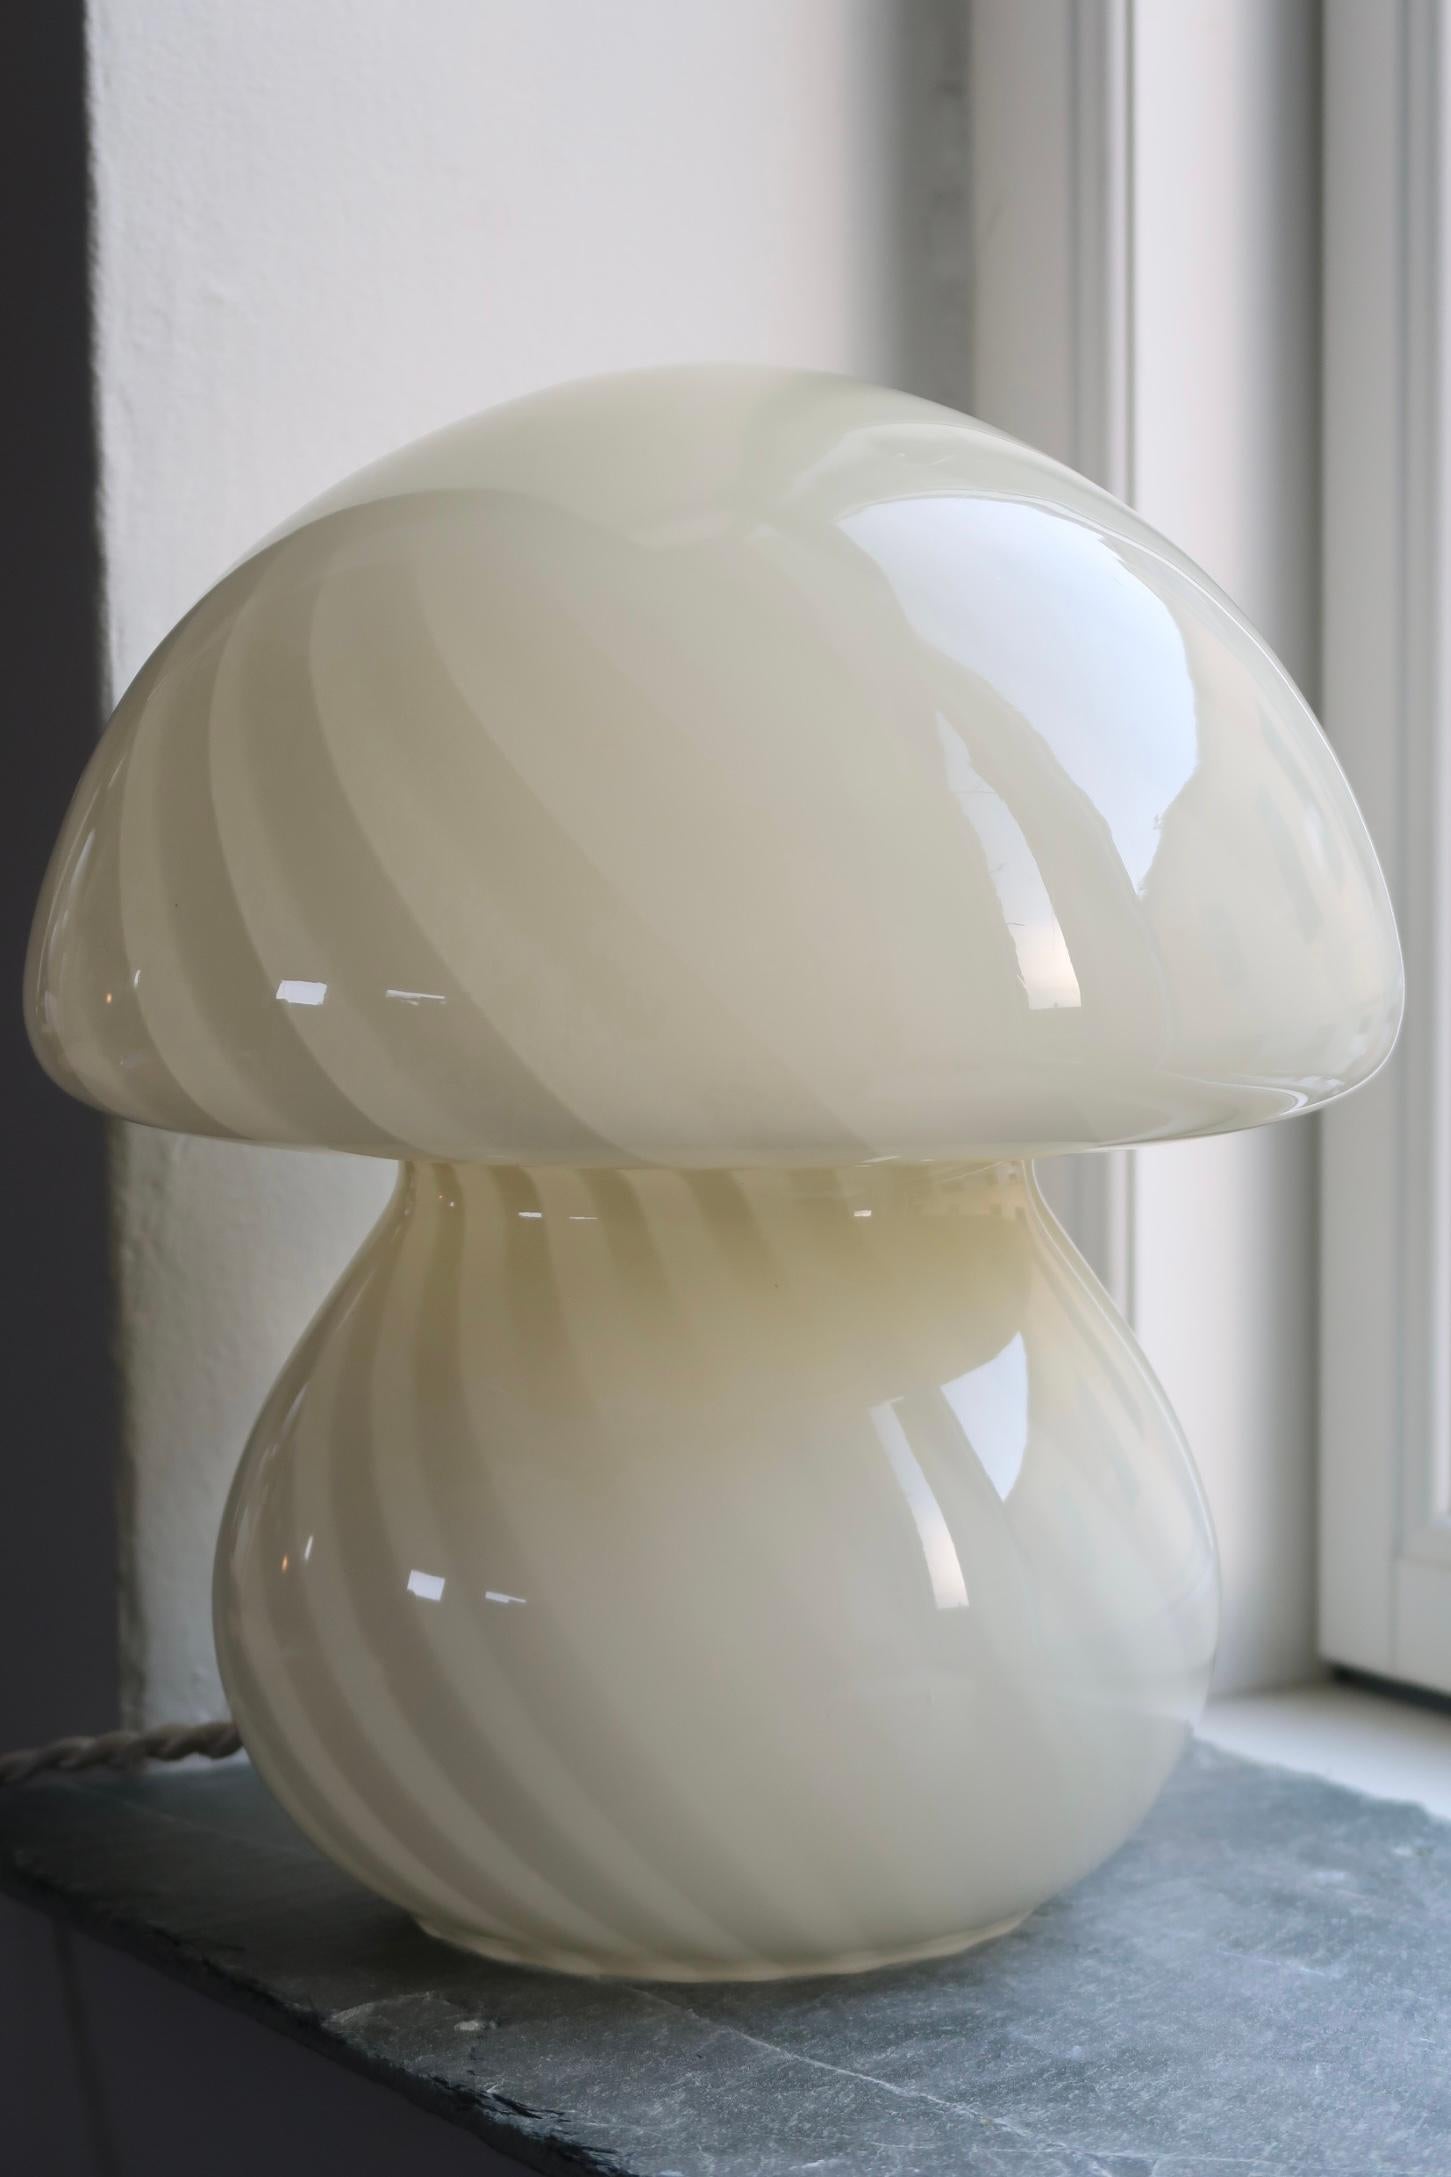 Vintage medium Murano champignon mushroom table lamp in a beautiful, delicate cream yellow shade. Mouth blown in one piece of glass with a swirl pattern. Handmade in Italy, 1960s/70s, and comes with new white cord. ⁠H: 28 cm D: 24 cm⁠
